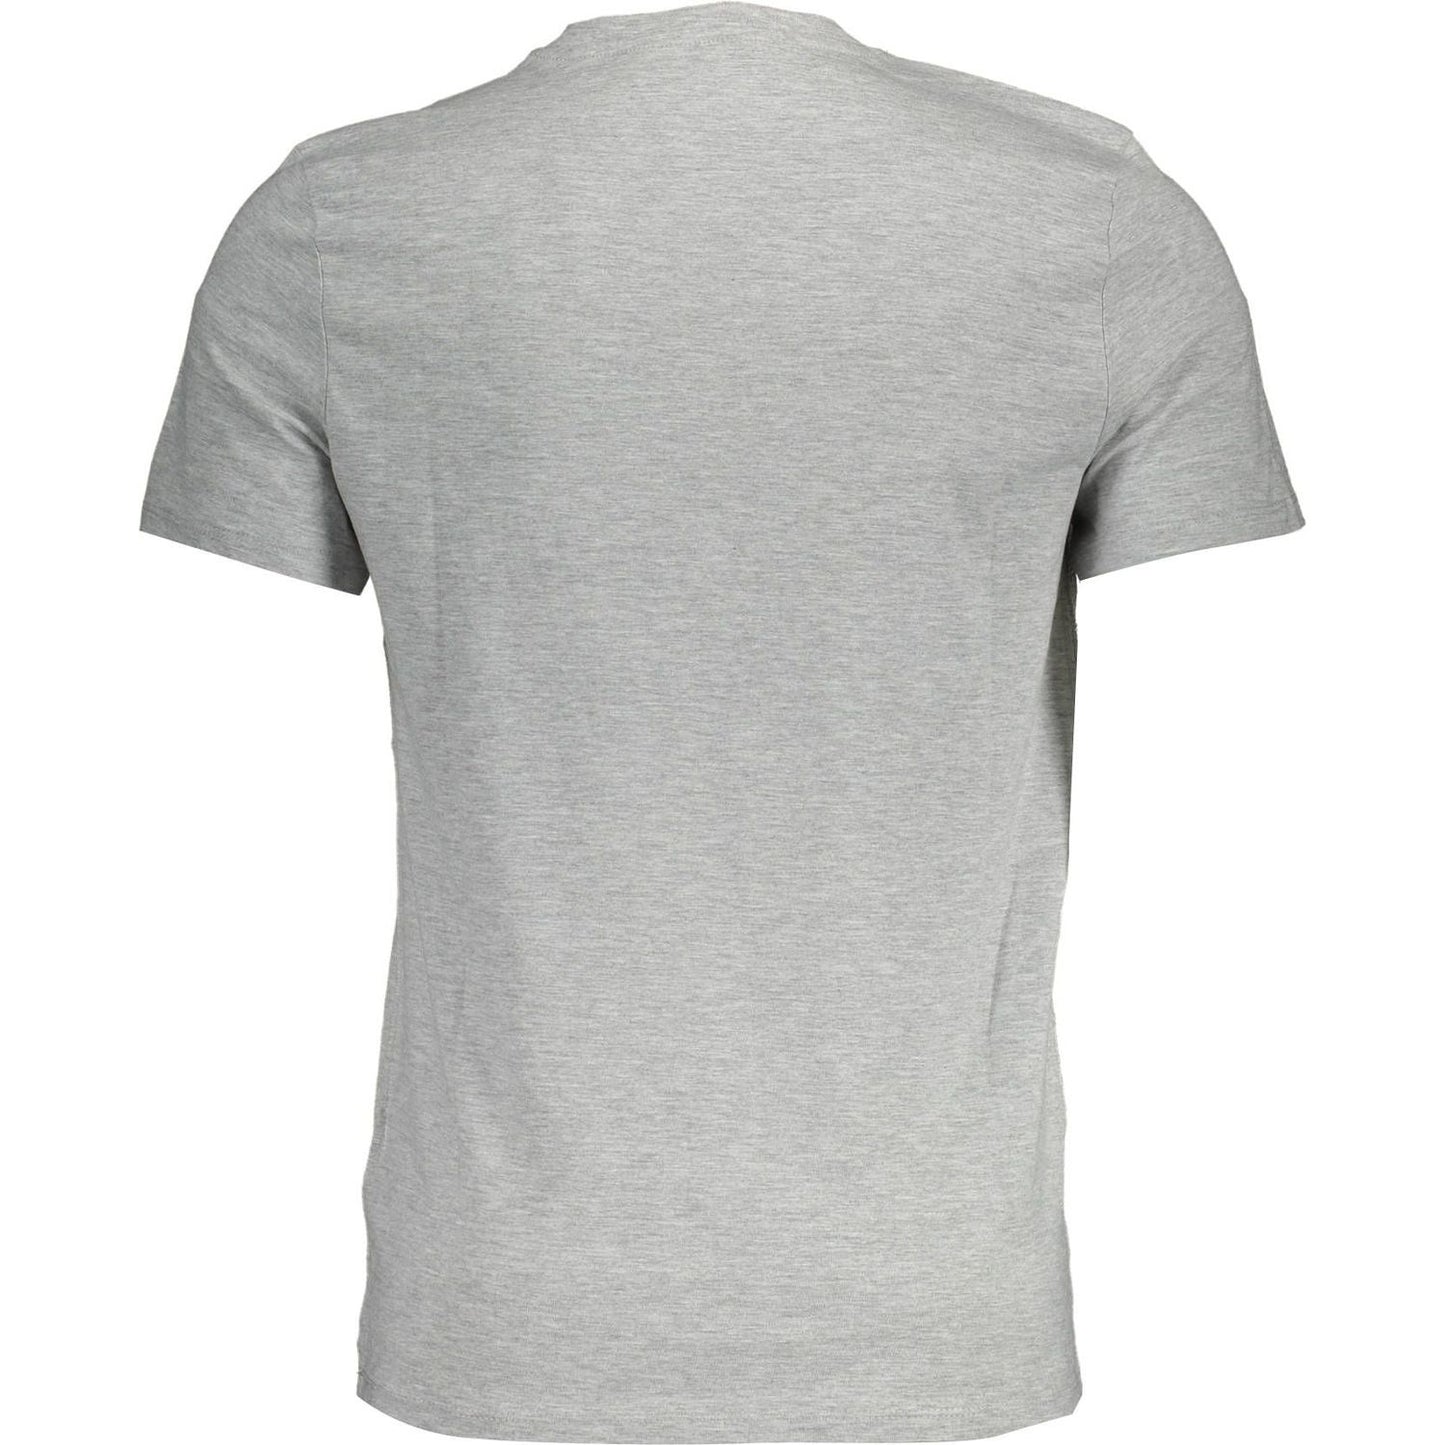 Guess Jeans Sleek Slim Fit V-Neck Tee in Gray sleek-slim-fit-v-neck-tee-in-gray